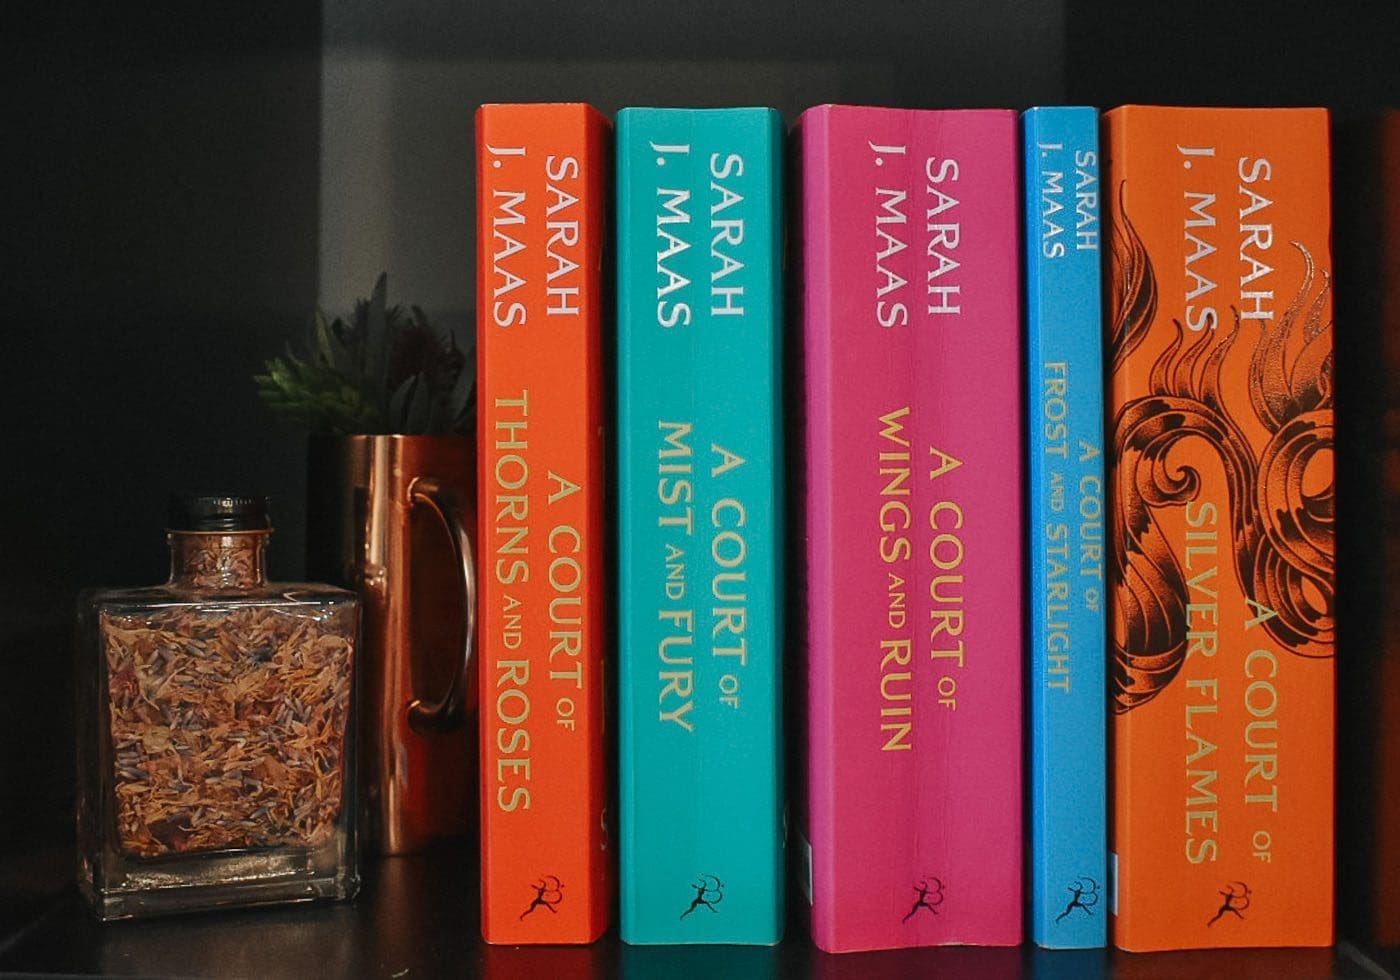 Curious about the A Court of Thorns and Roses Series by Sarah J. Maas? Get details on ACOTAR characters, plot points, and series FAQ here!